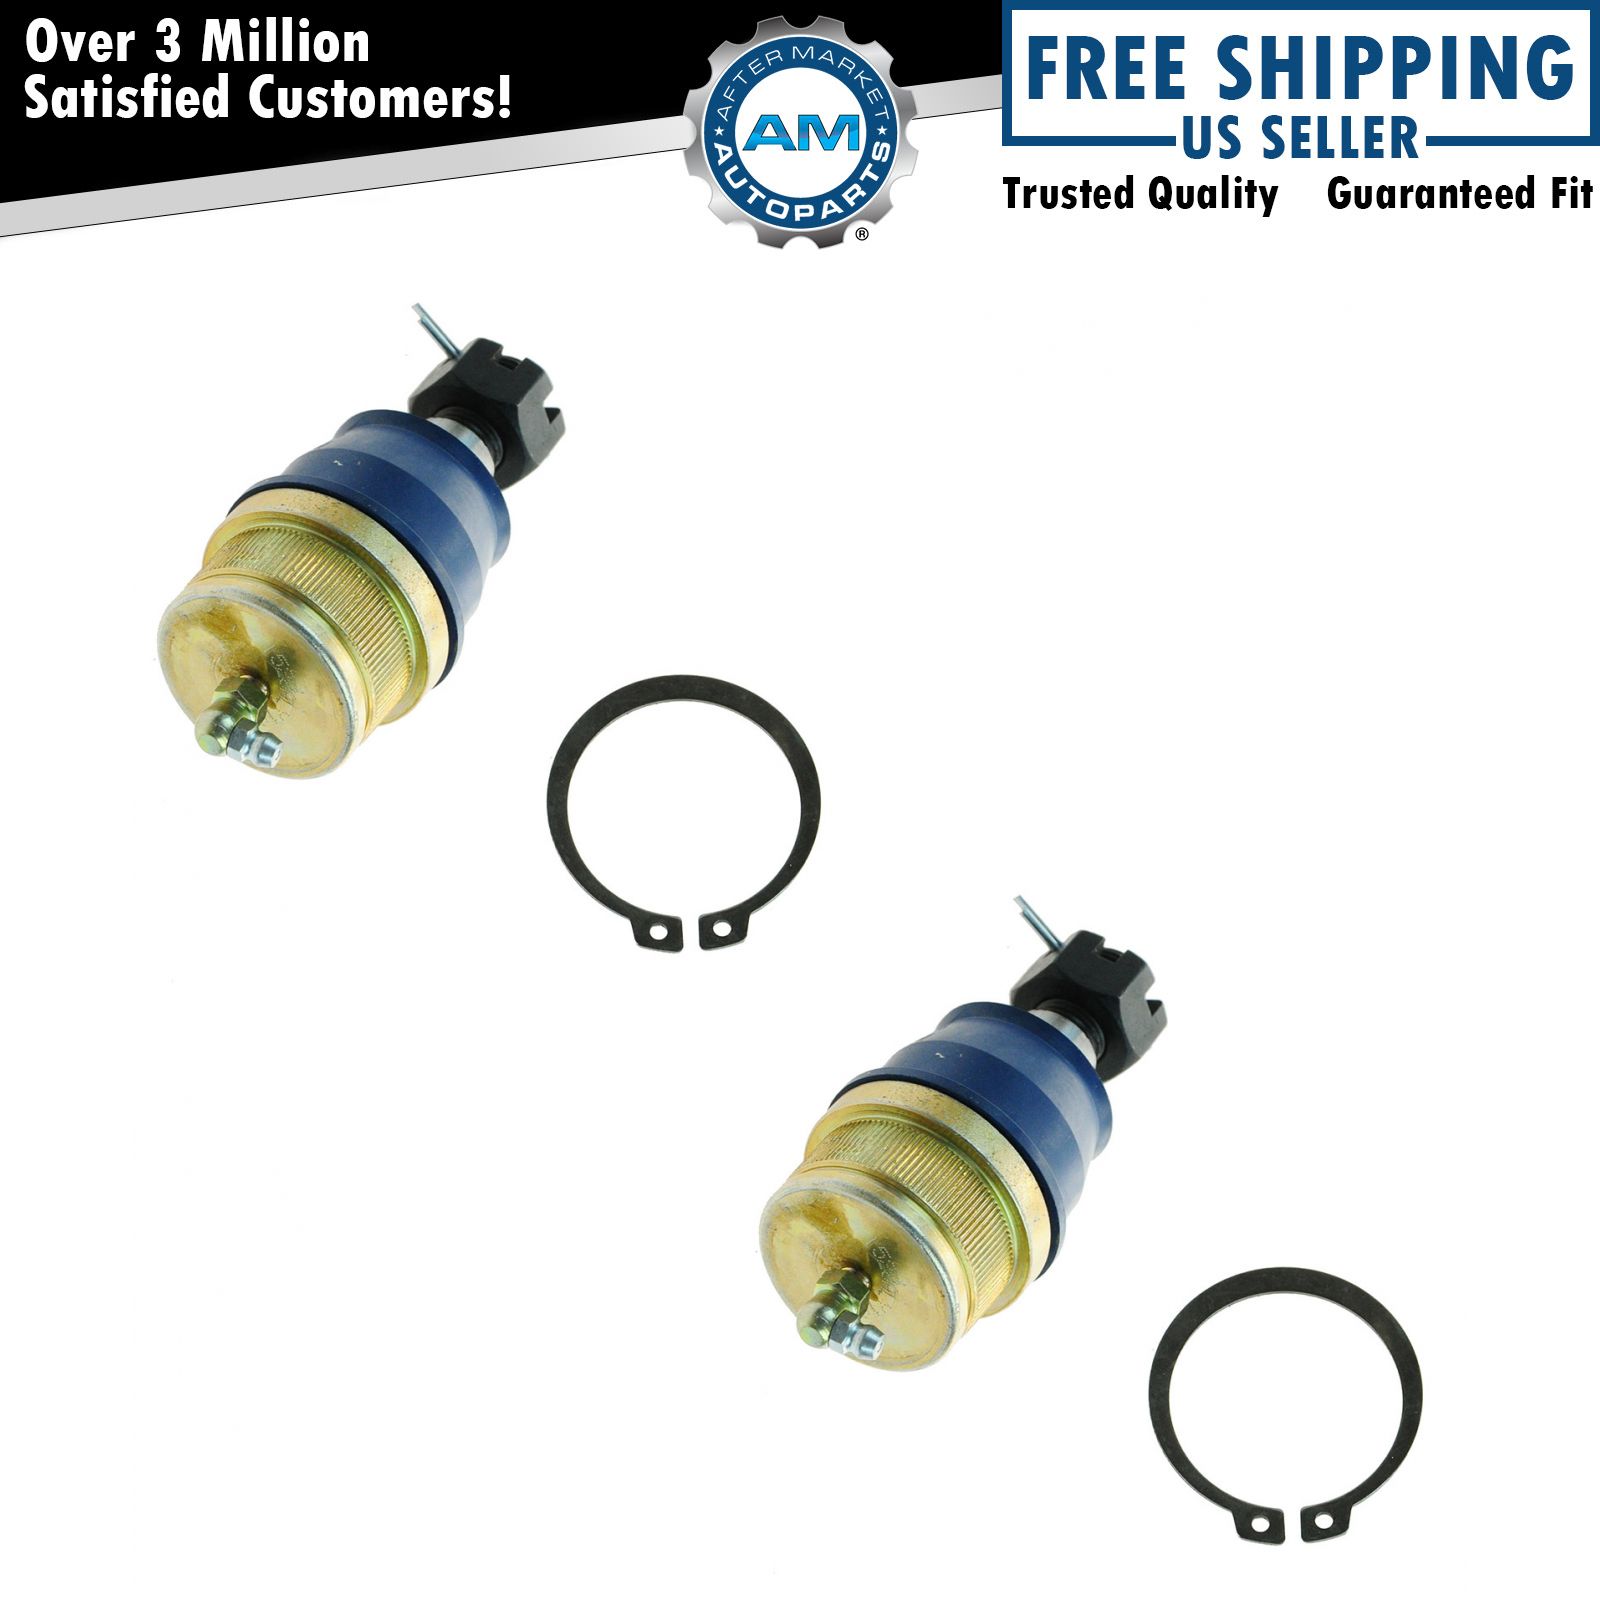 AC DELCO Front Lower Ball Joints Left & Right Pair Set for Chevy GMC Cadillac